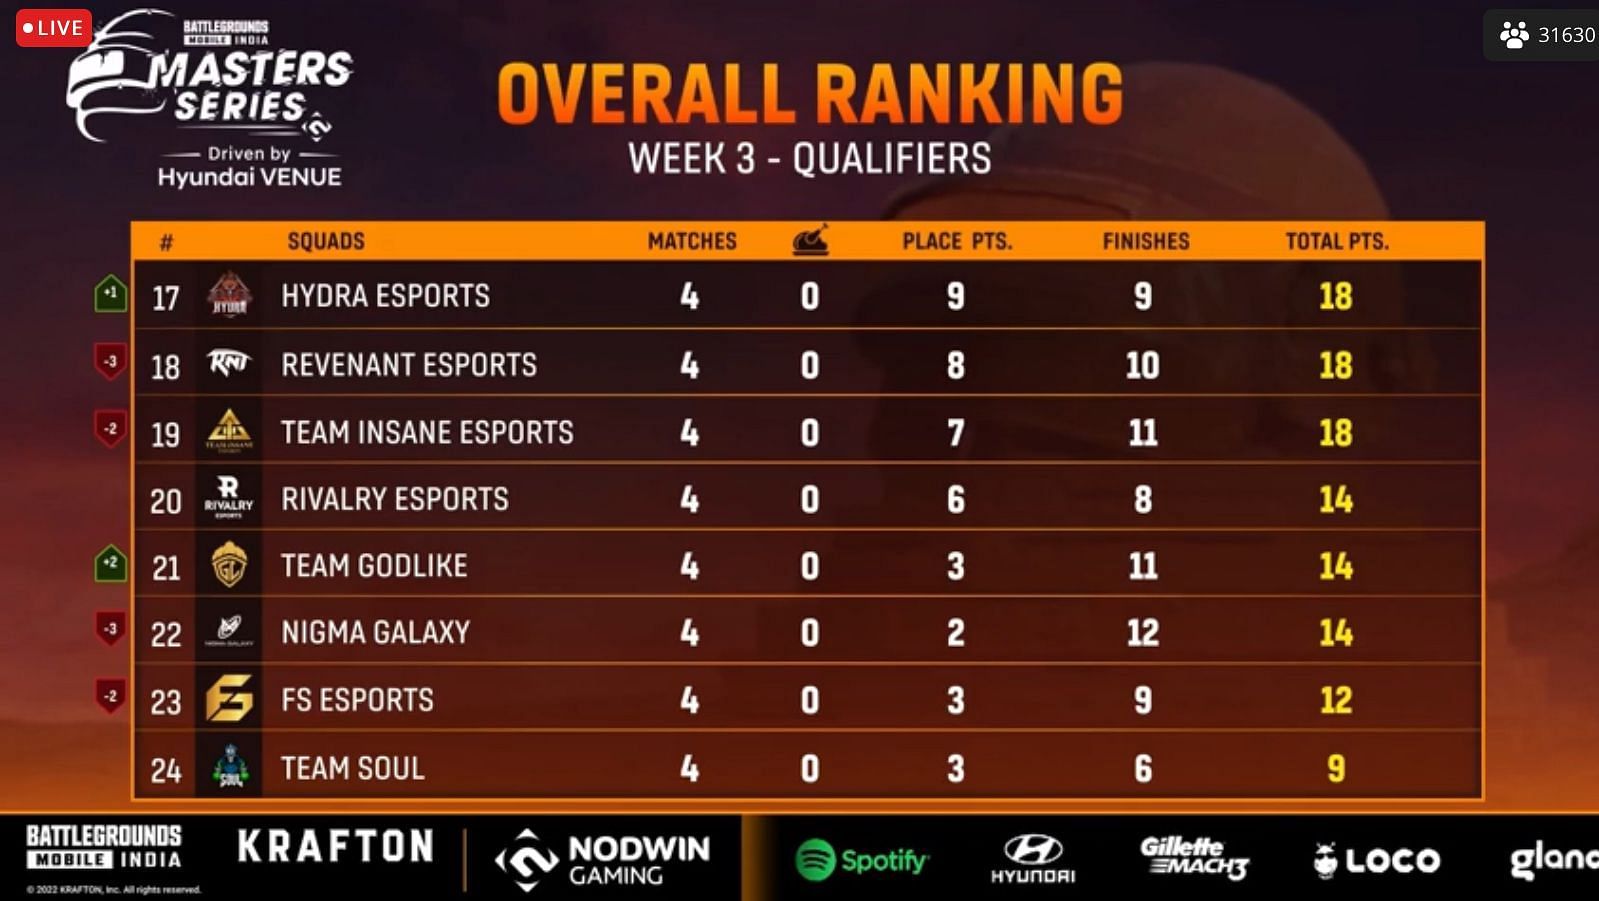 GodLike finished 20th after BGMI Masters Series Week 3 Day 2 (Image via Loco)